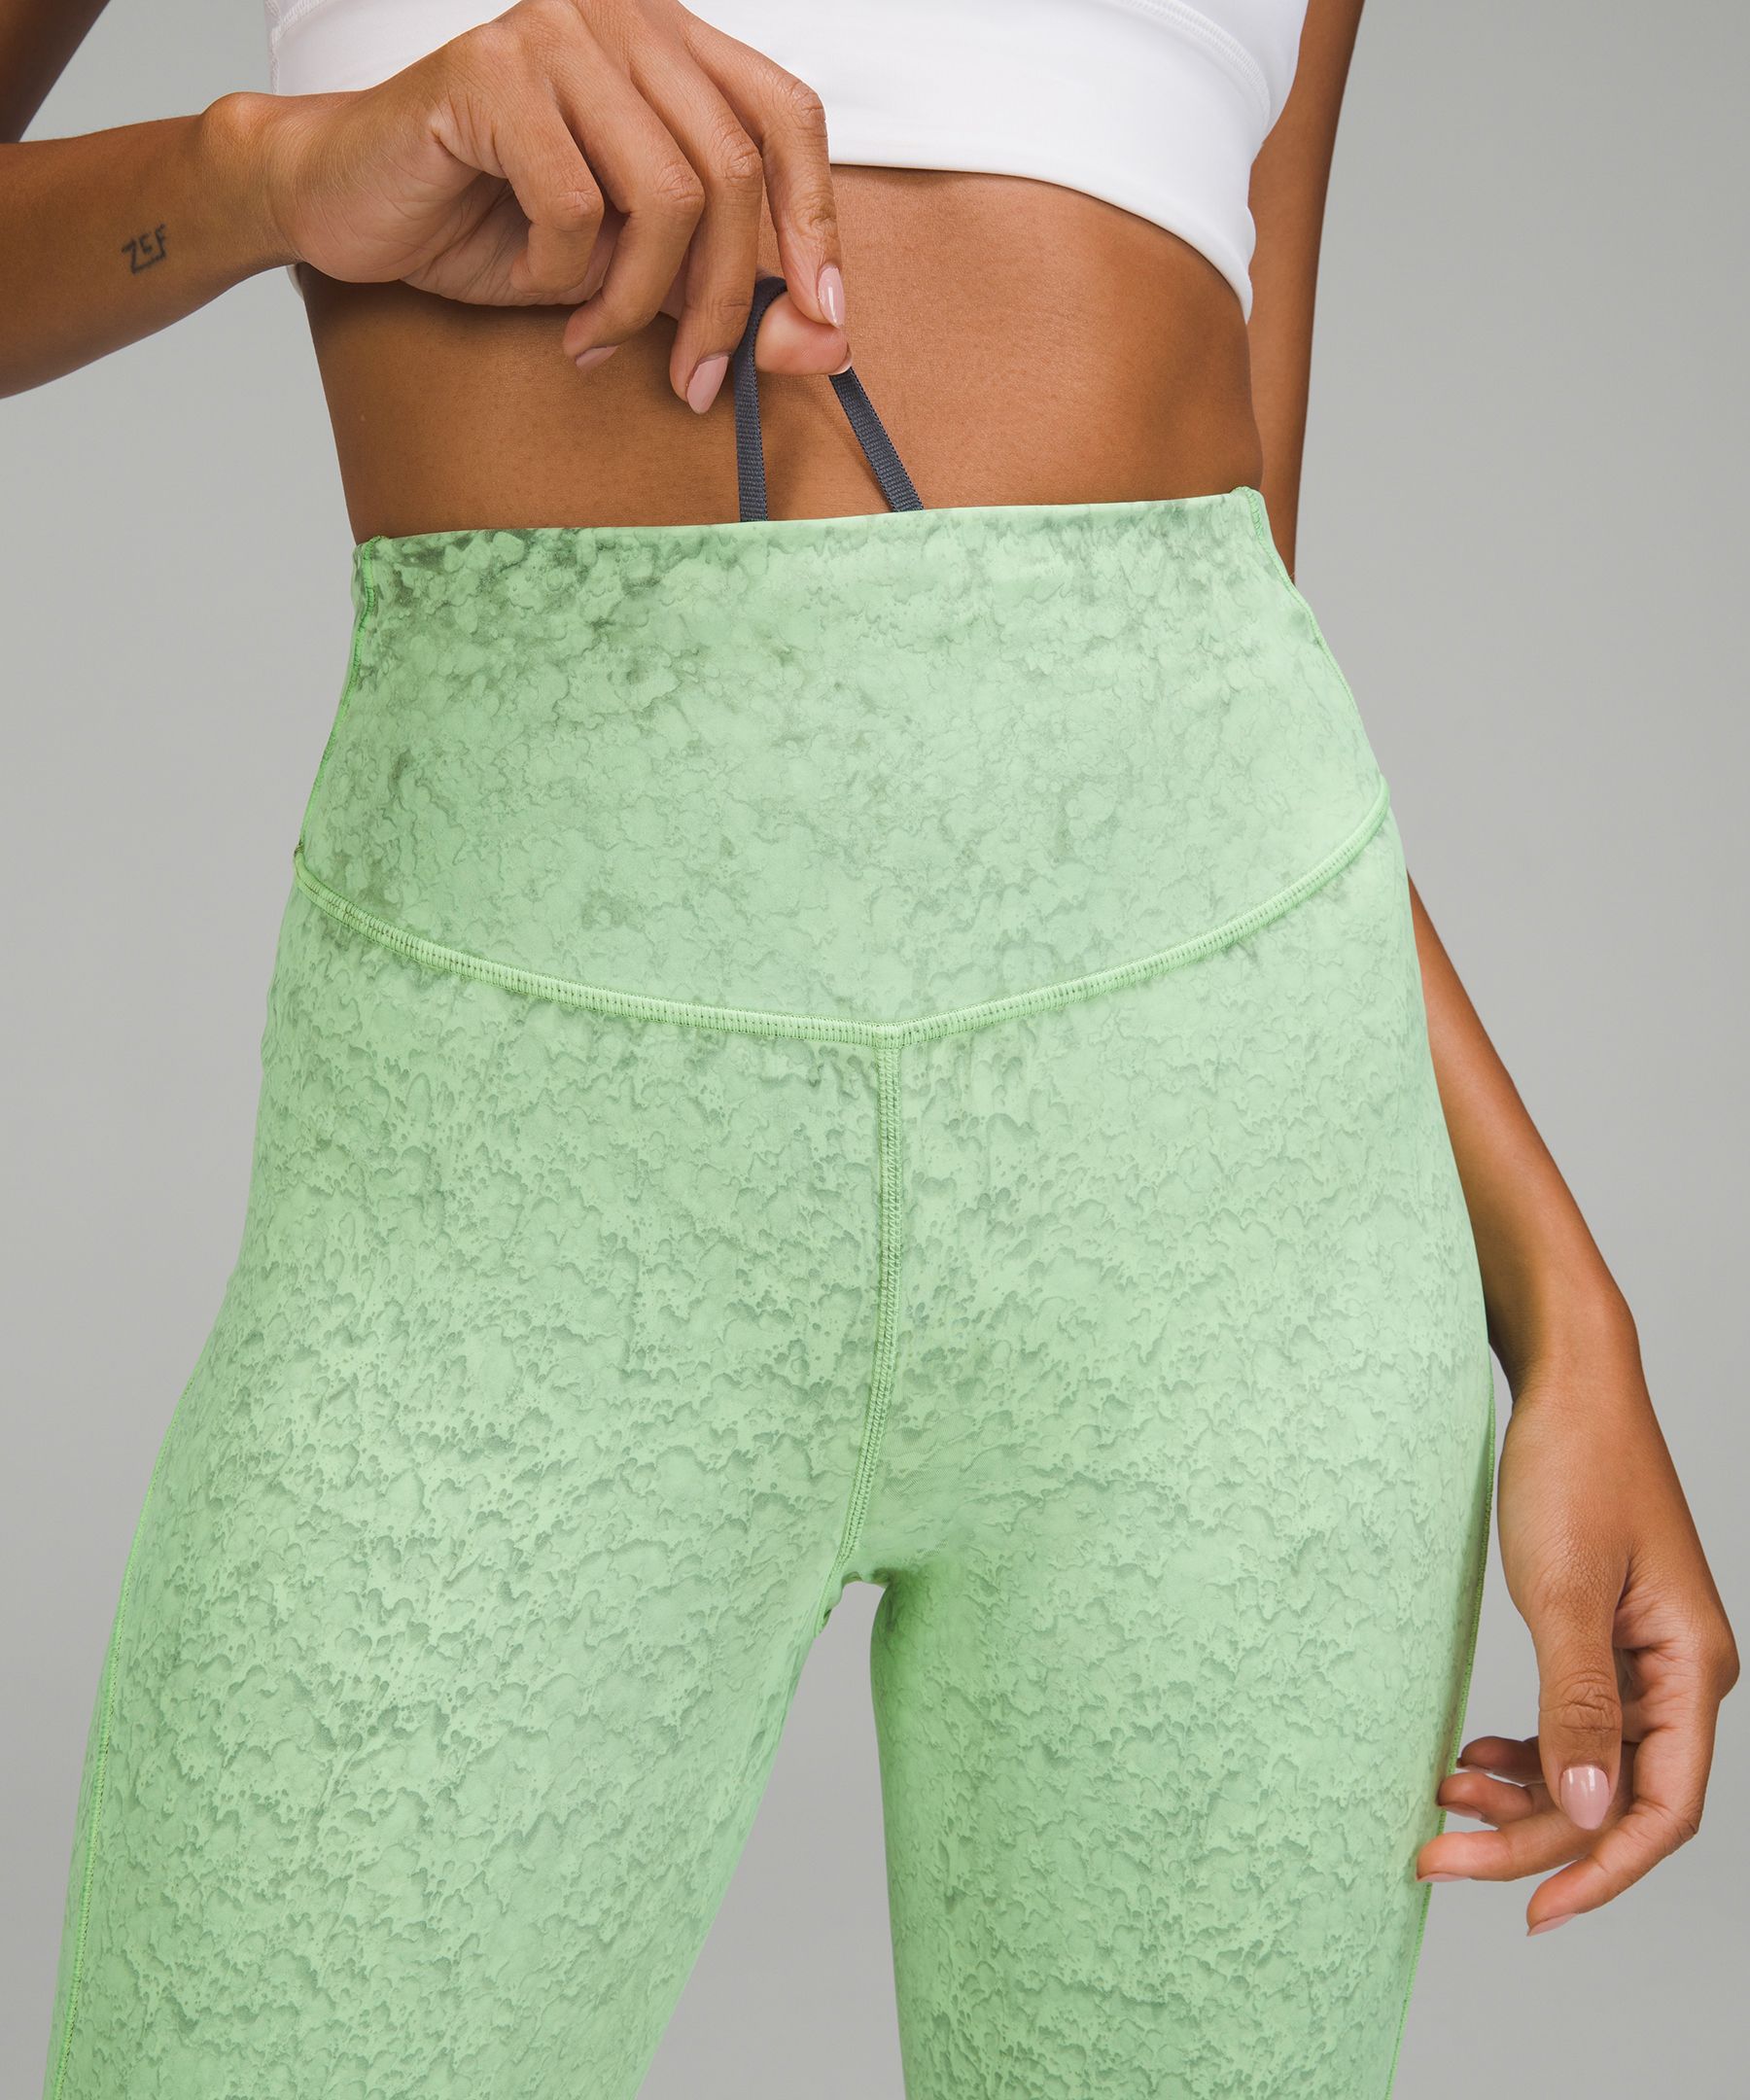 Lululemon Base Pace High-Rise Running Tight 25 Women's Size 4 - $55 - From  Chloe